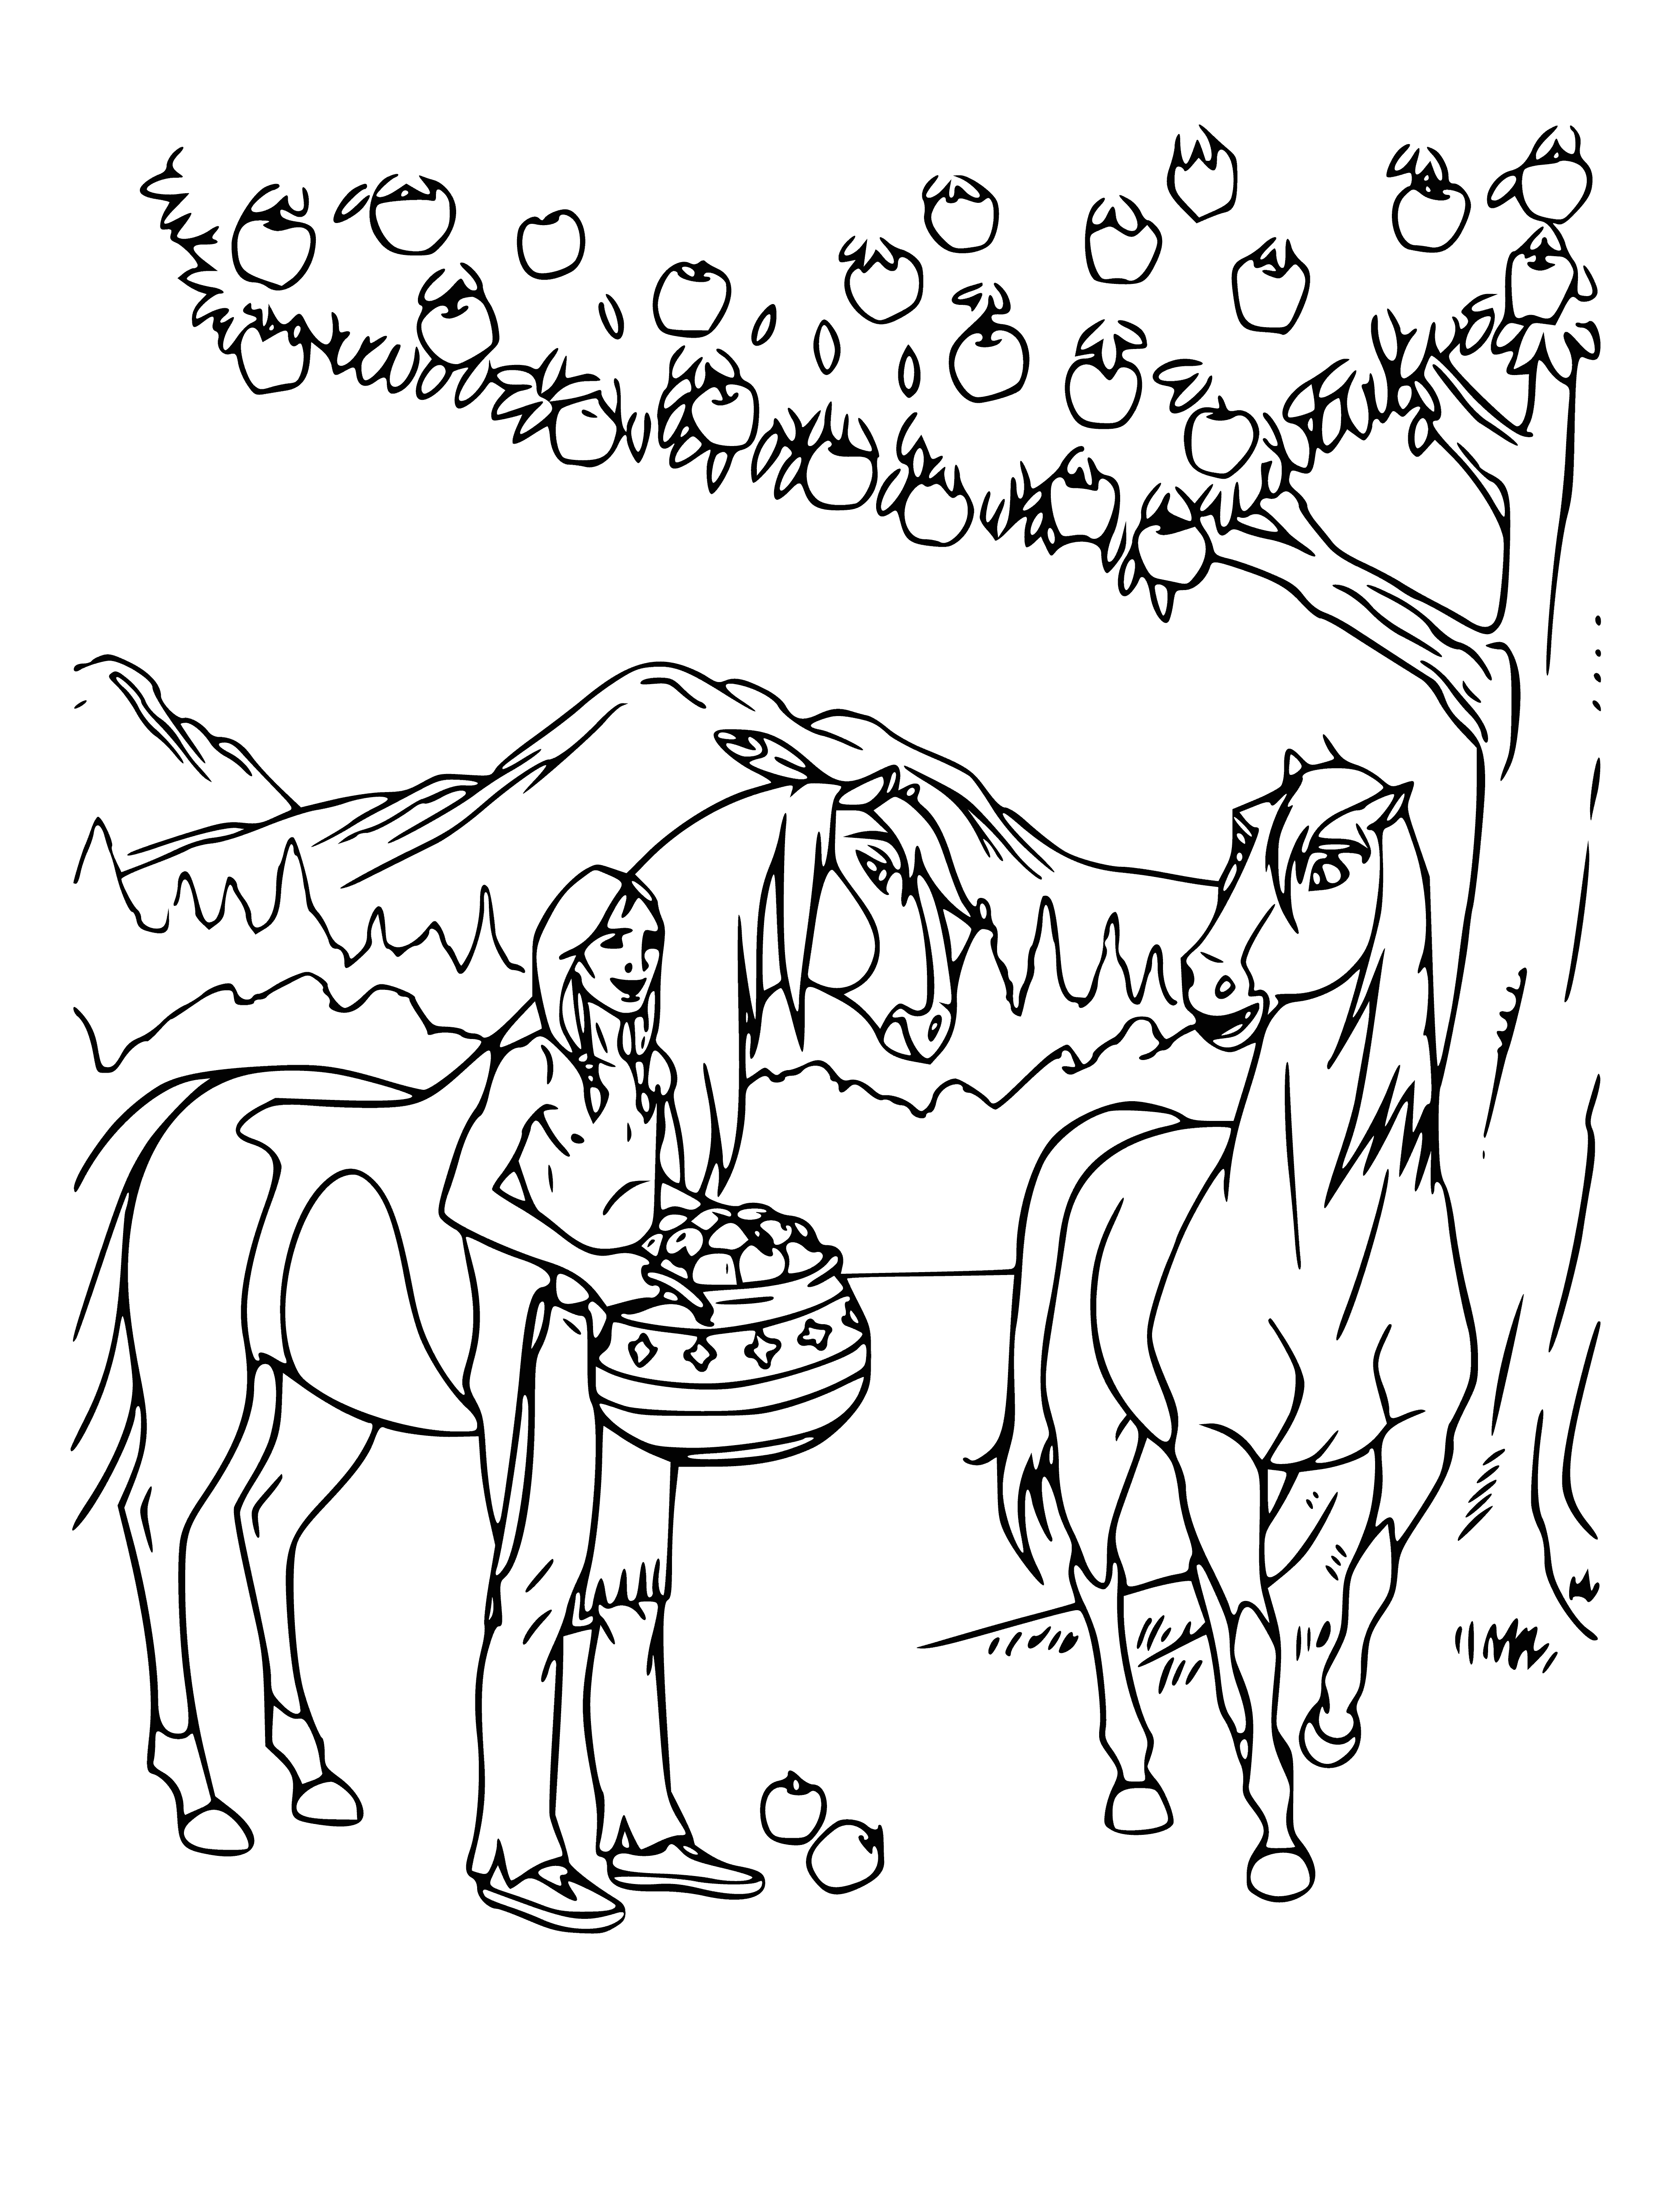 coloring page: An Indian man is depicted holding apples, with a long braid, headdress and necklace. He stares out at the viewer with a solemn expression.